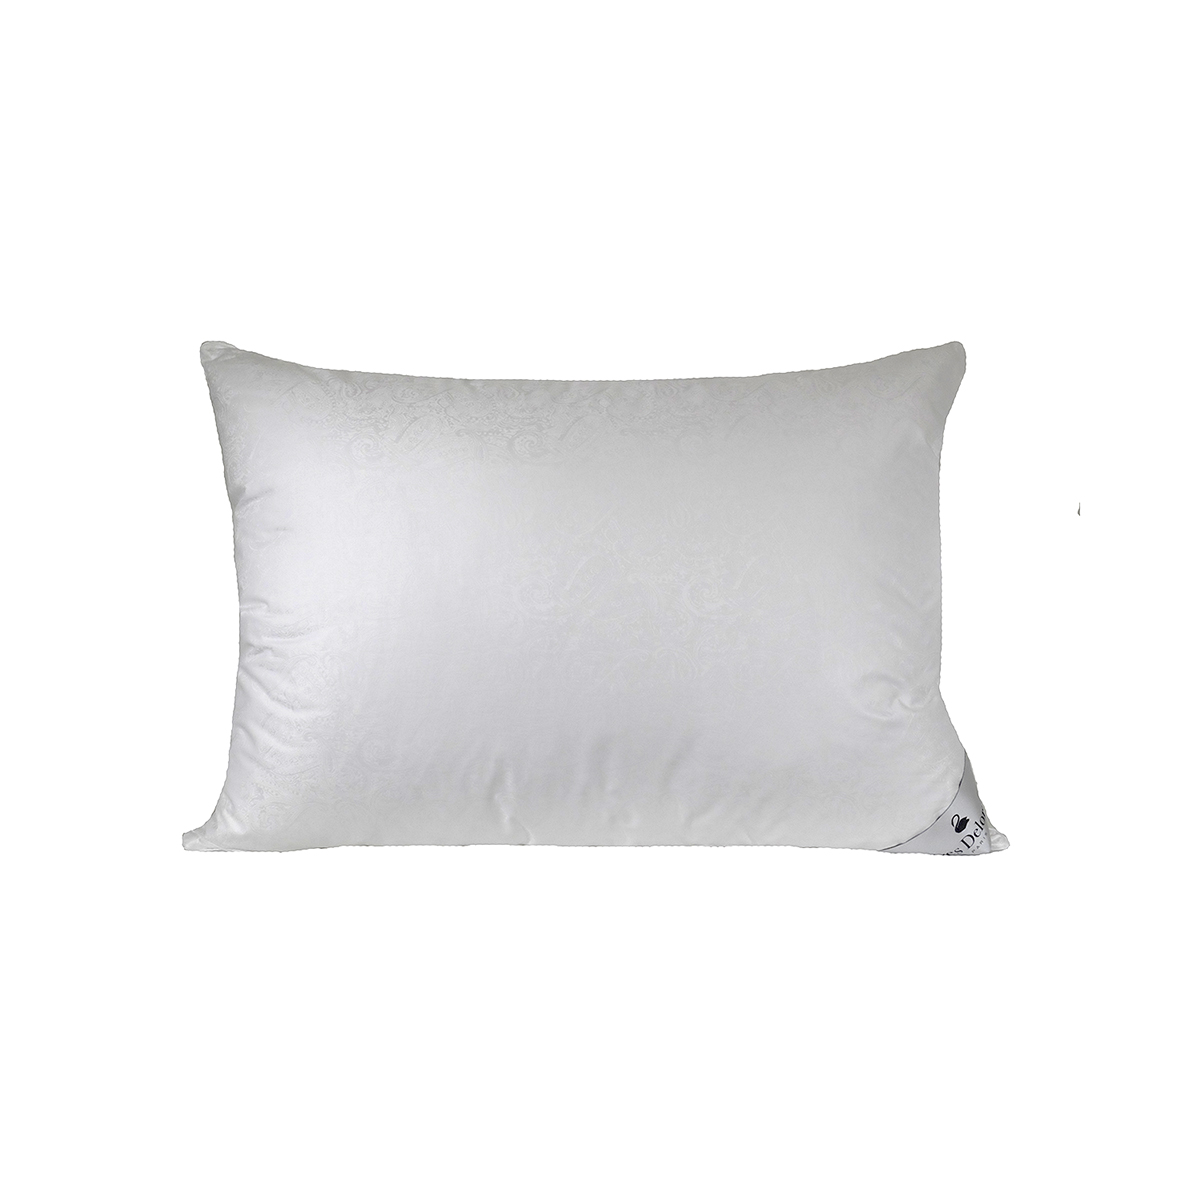 YVES DELORME DOWN & FEATHER 3-CHAMBER PILLOWS 